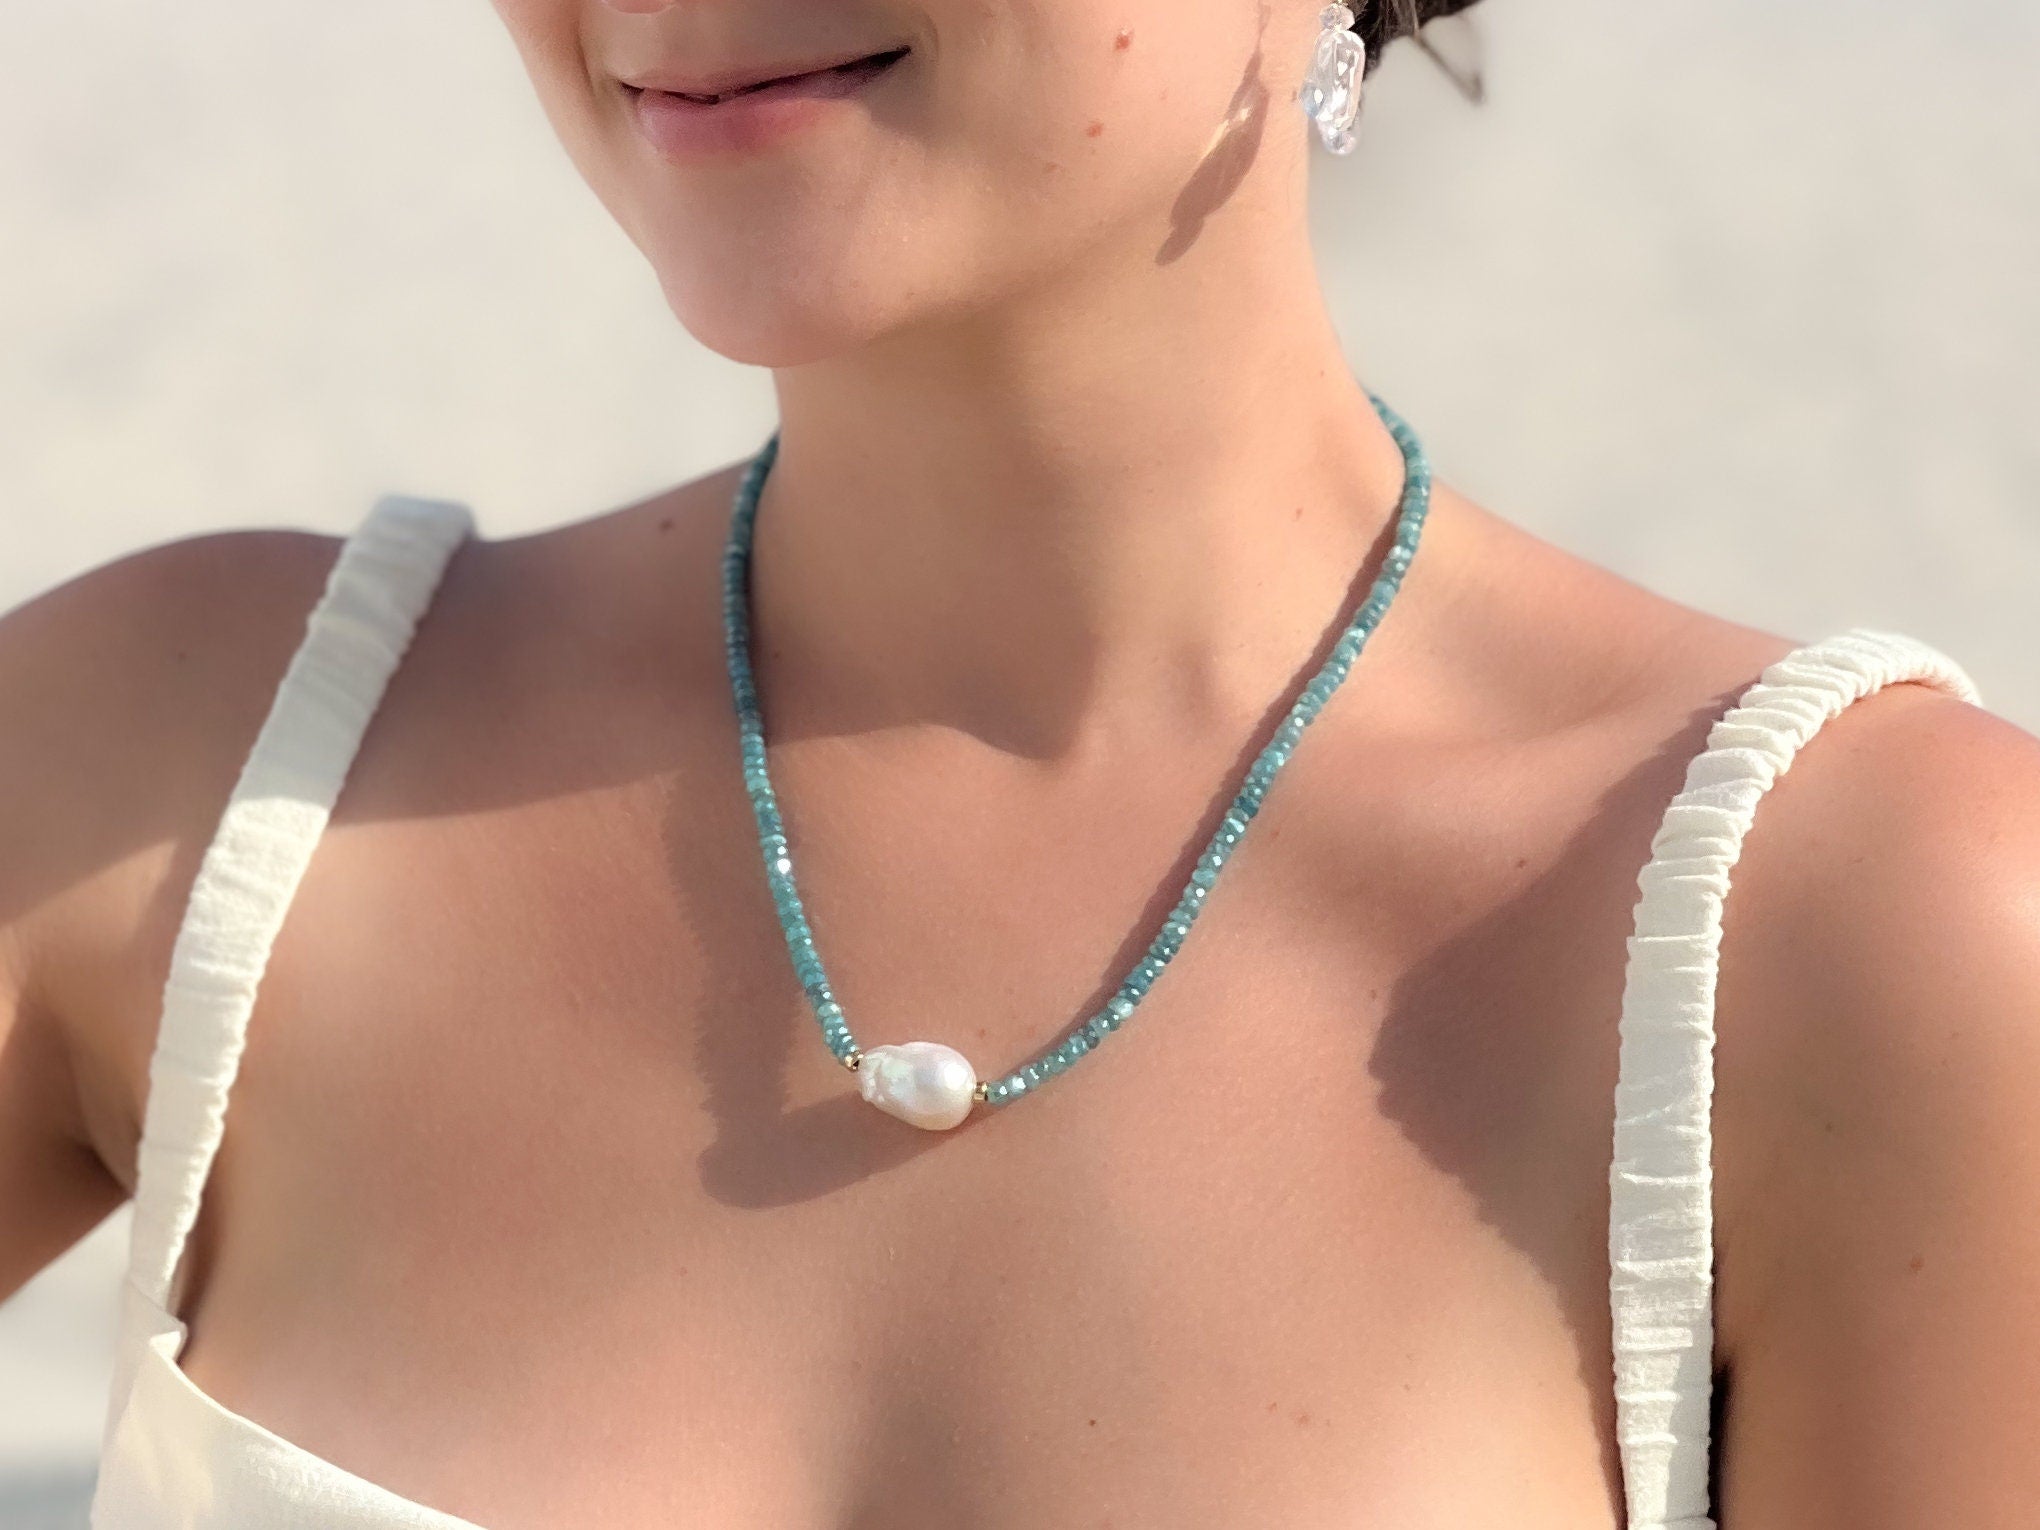 Natural_Gemstones,Baroque_Pearls,Silverite_necklace,Blue_necklace,Summer_necklace,Boho_style,Gift_She_Will_Love,Versatile_Necklace,Mom_Gift,Girl_Gift,Blue_Silverite,Handmade_Necklace,Pearl_and_Gemstone